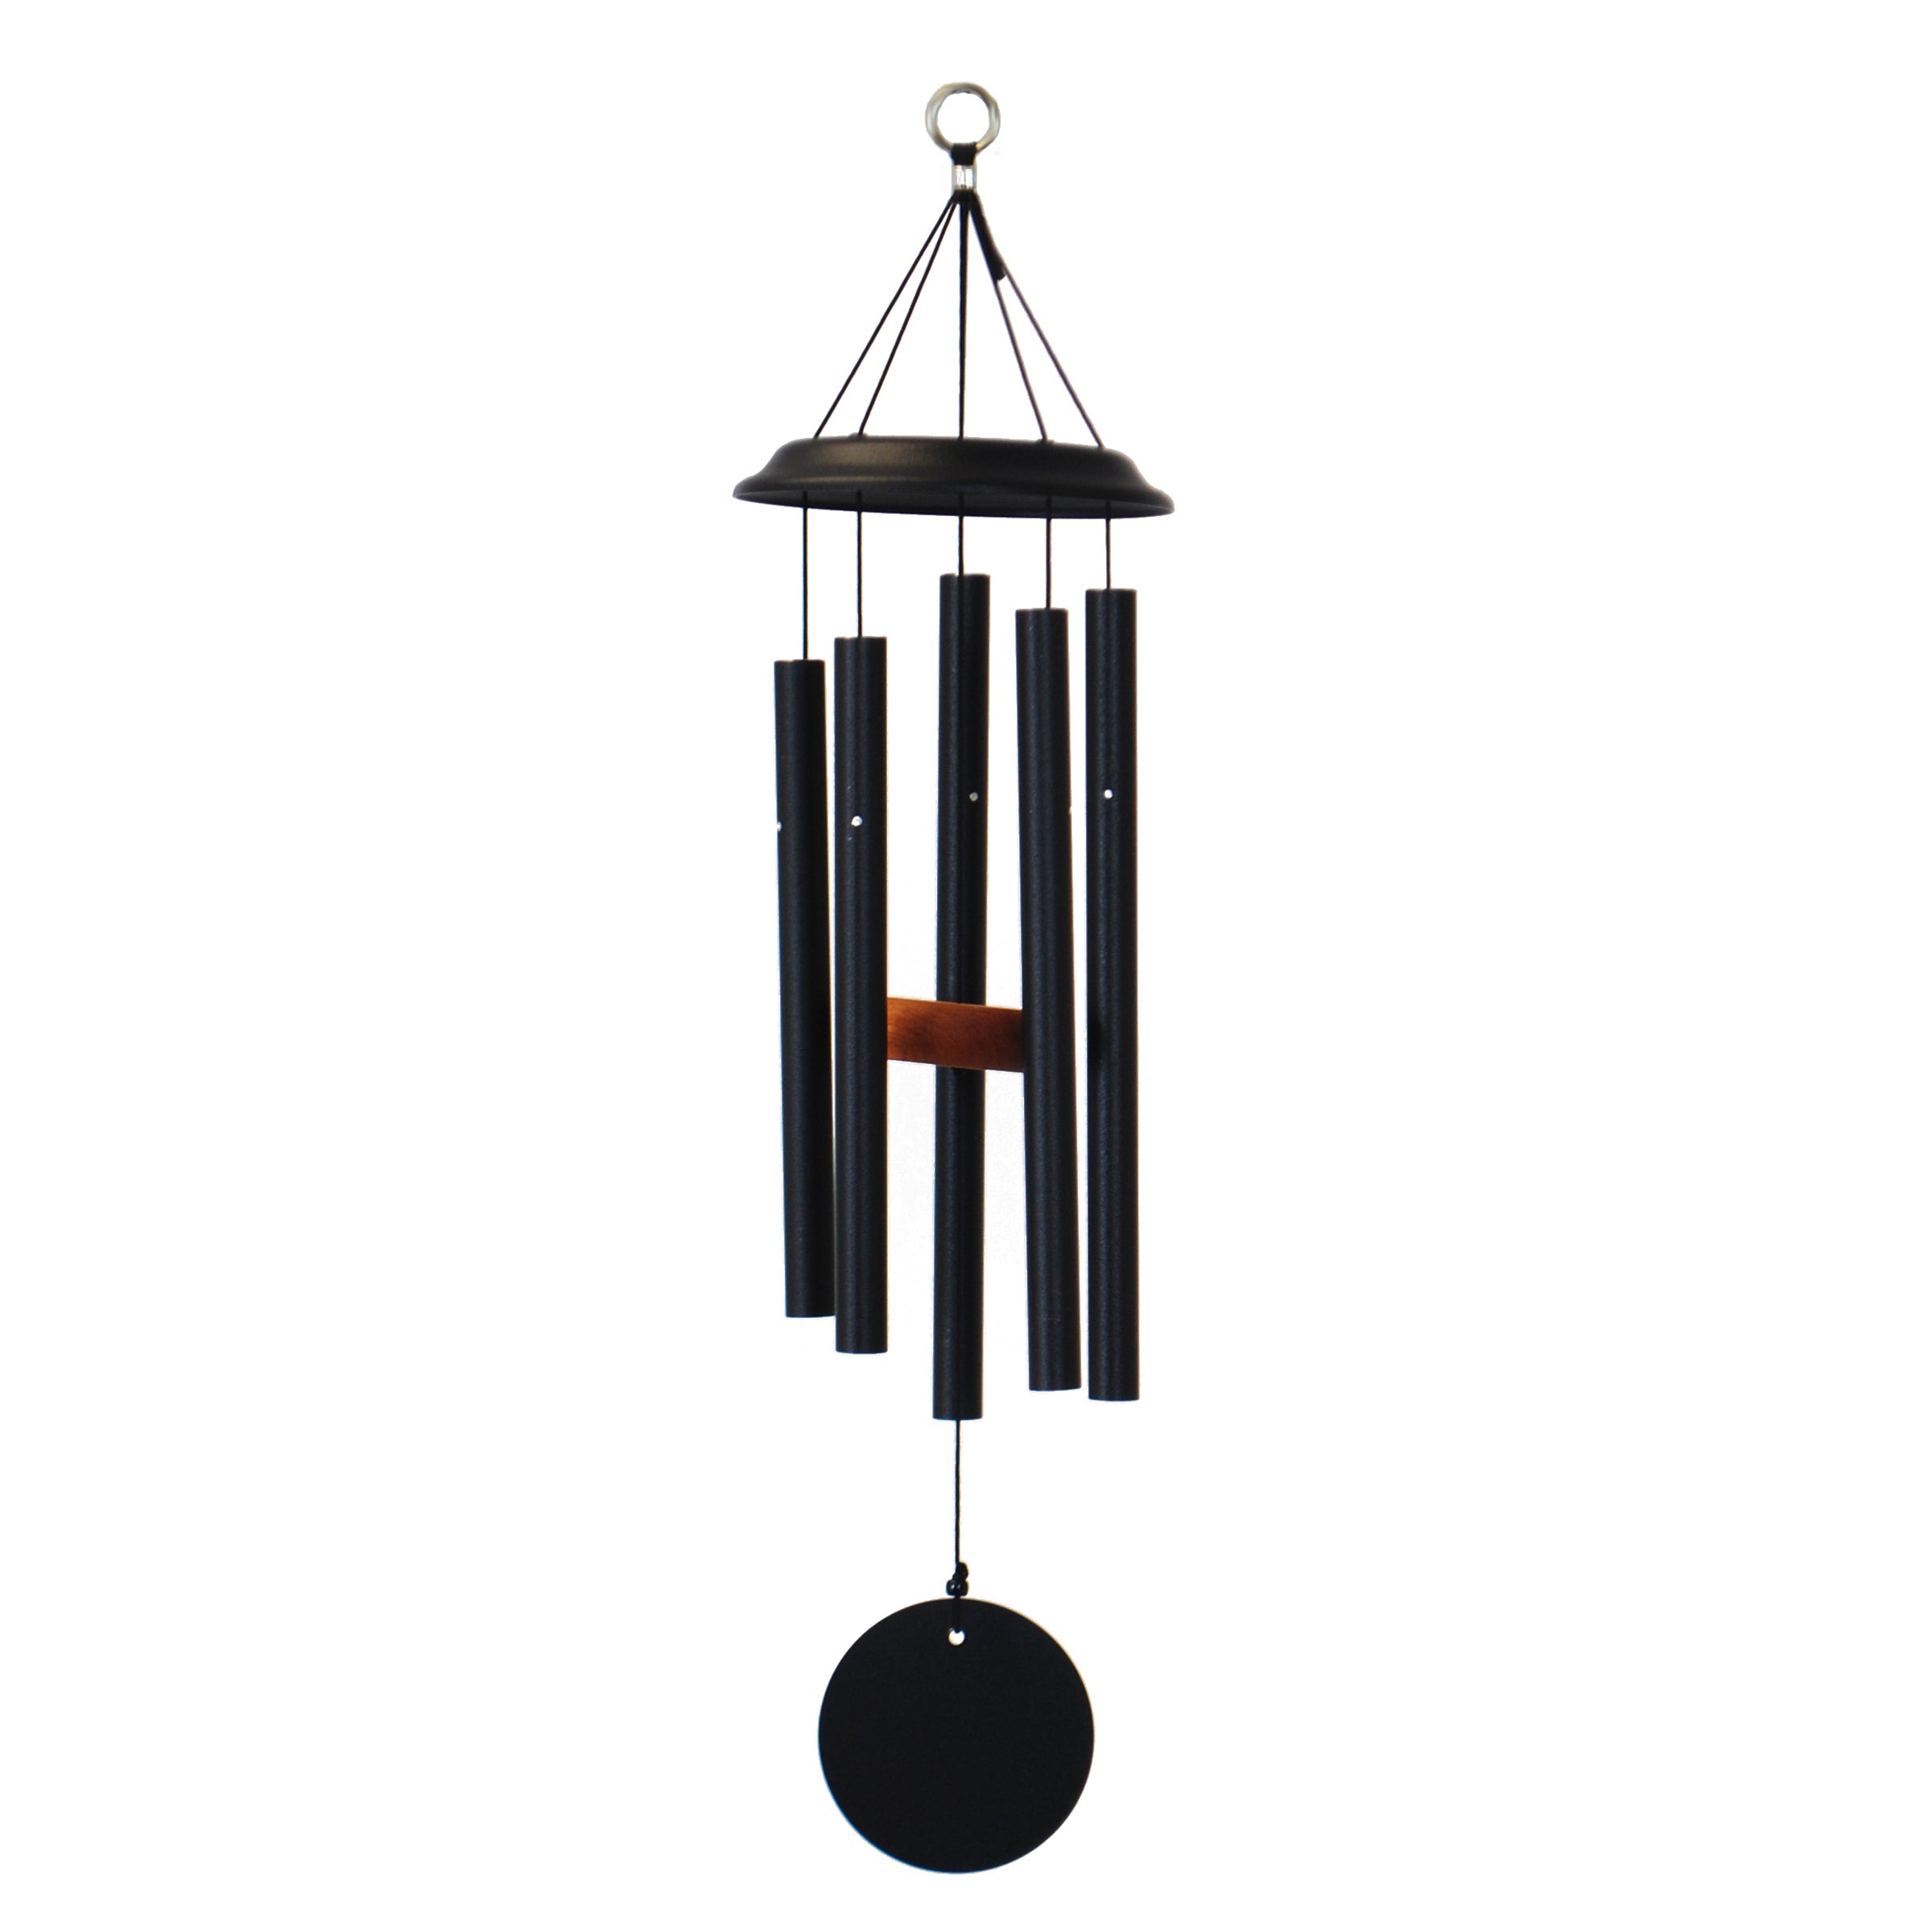 Wind River Shenandoah Melodies® 26 inch wind chimes